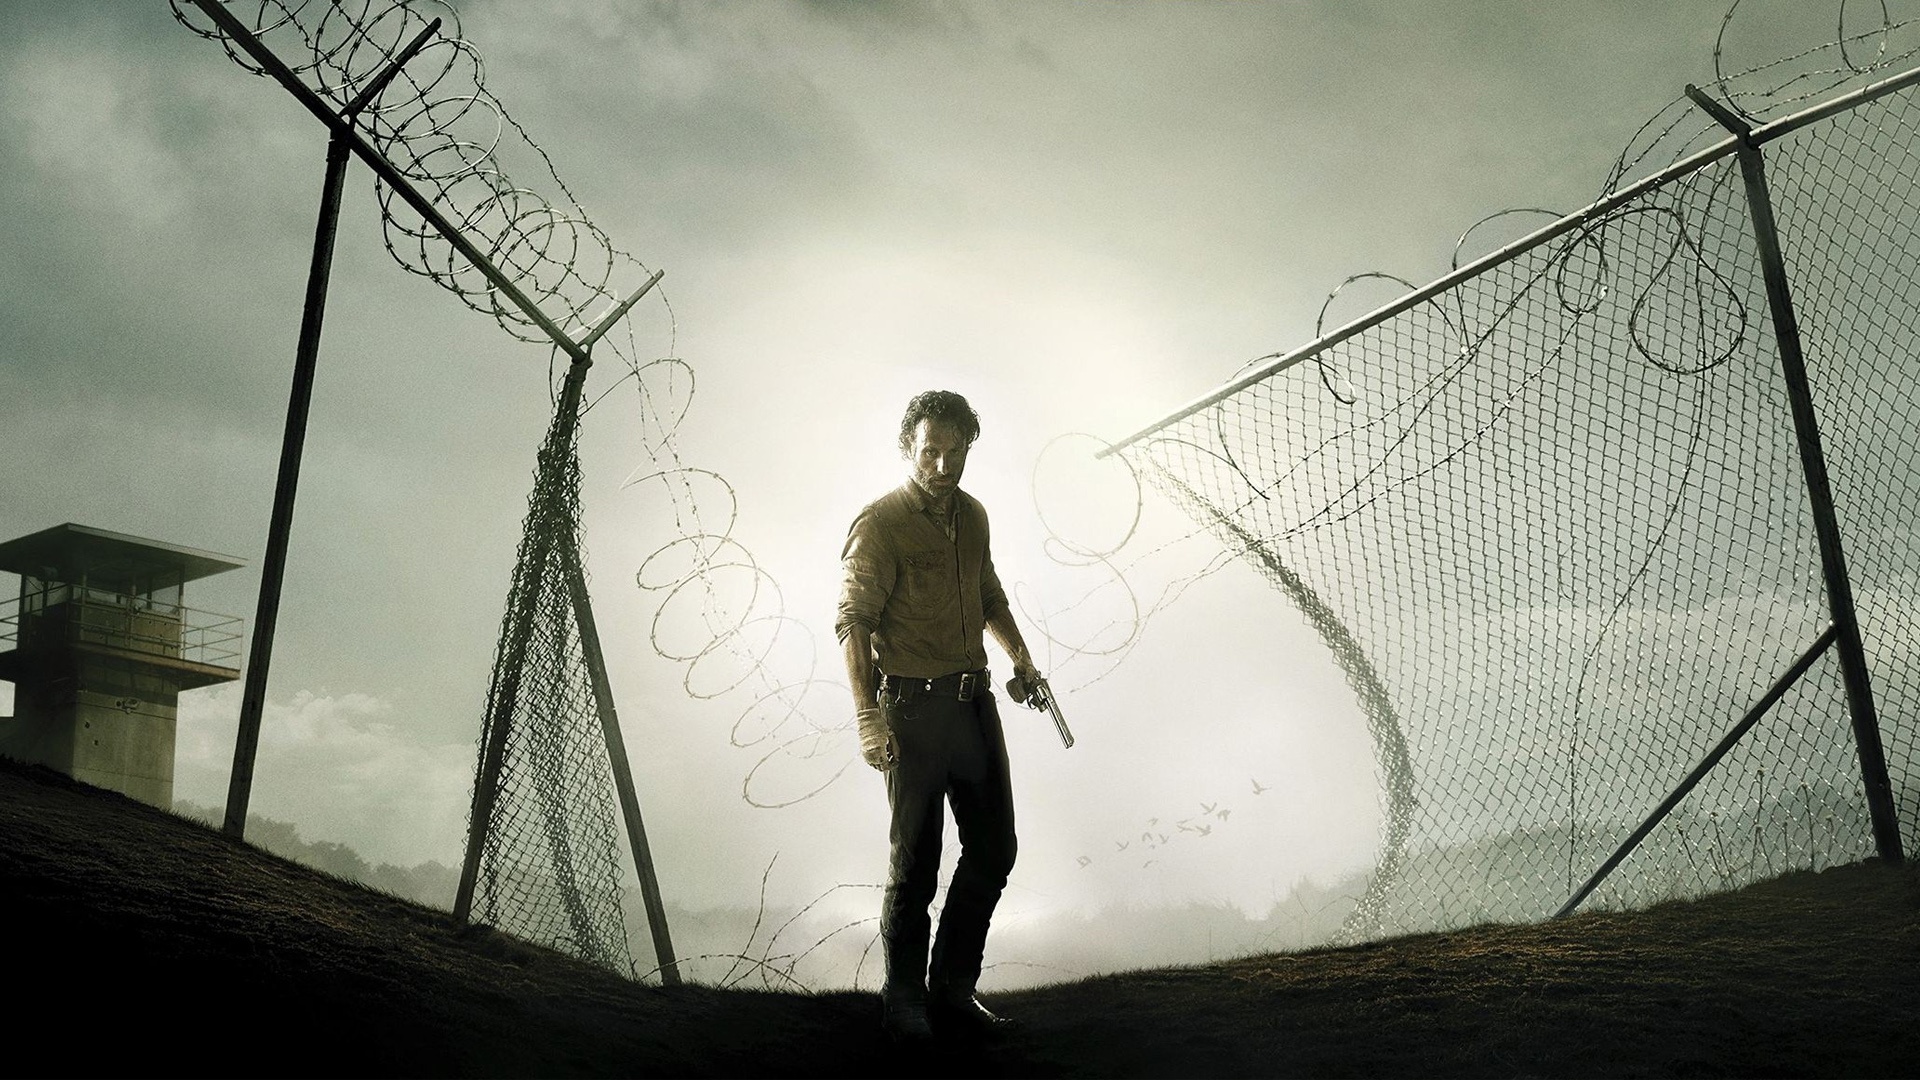 The Walking Dead Free Wallpapers   Wallpaper High Definition High